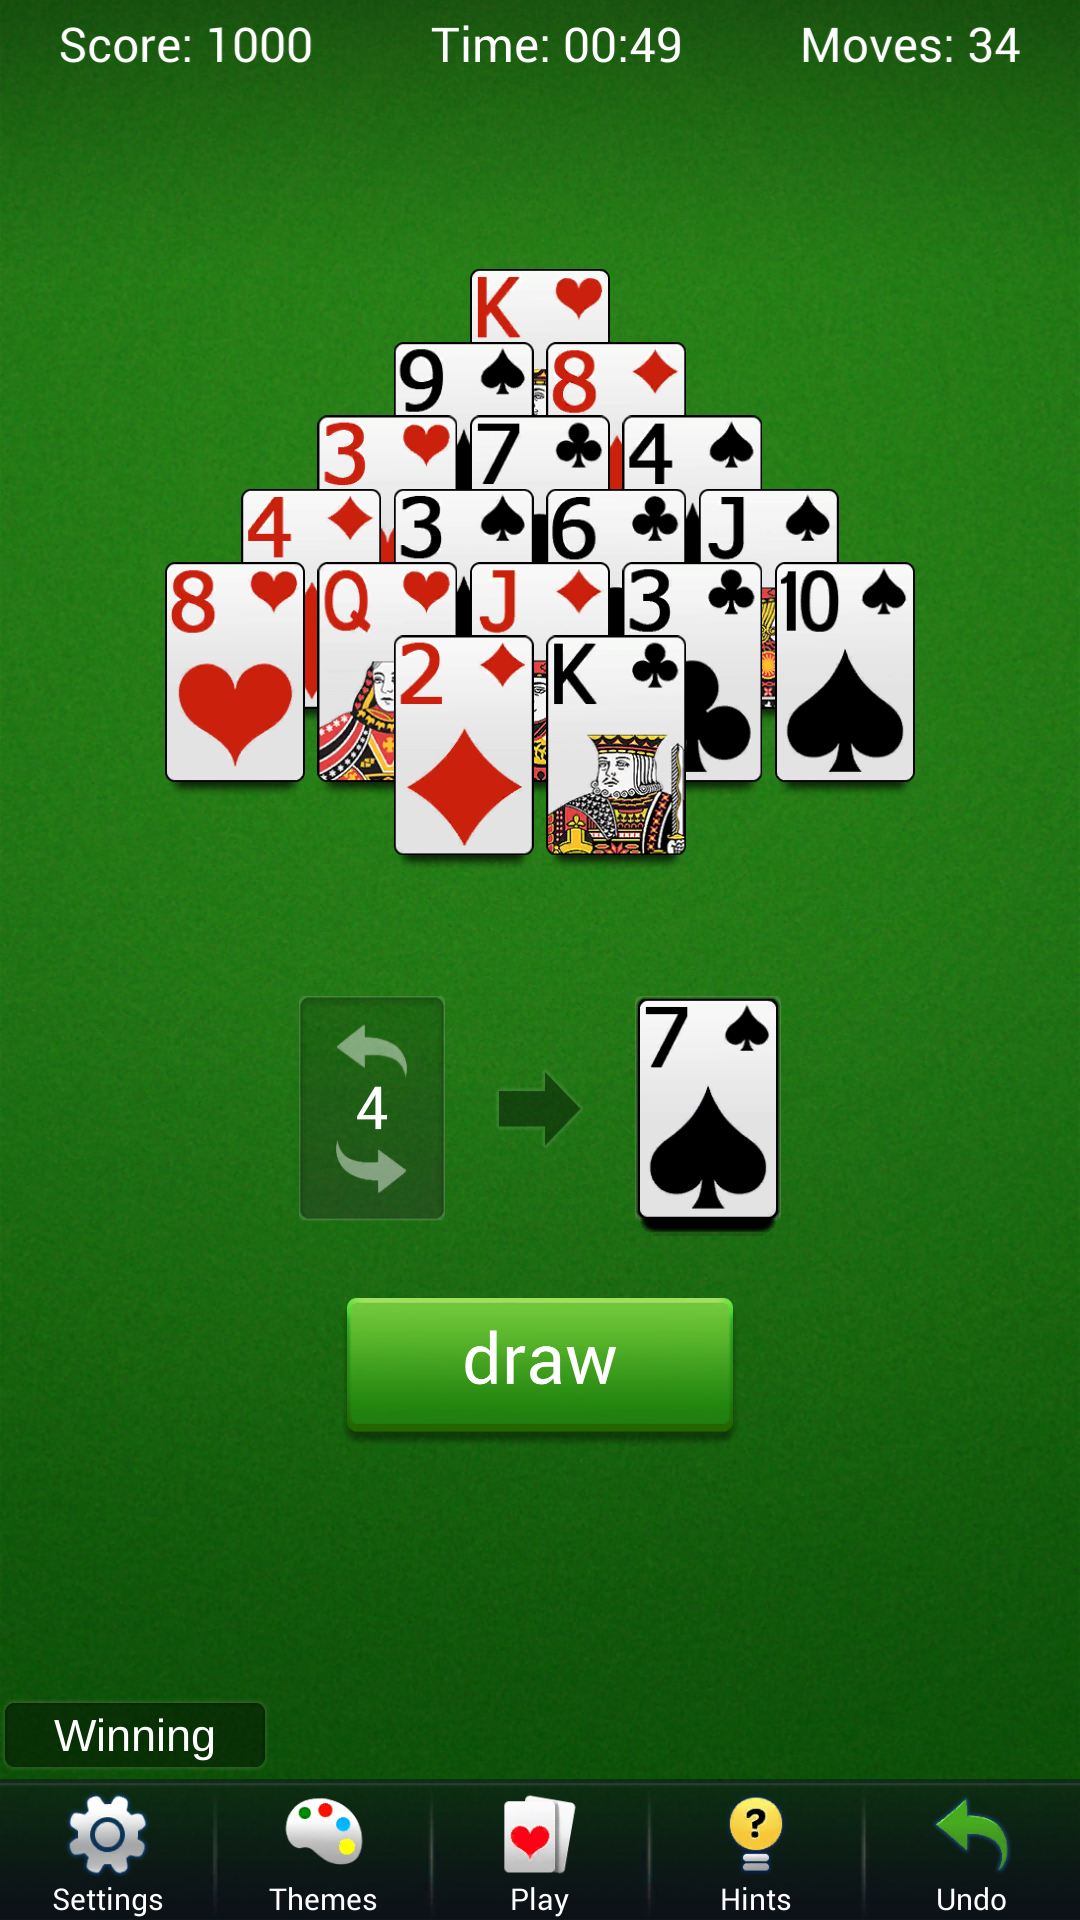 Play Pyramid Solitaire - Card Games Online